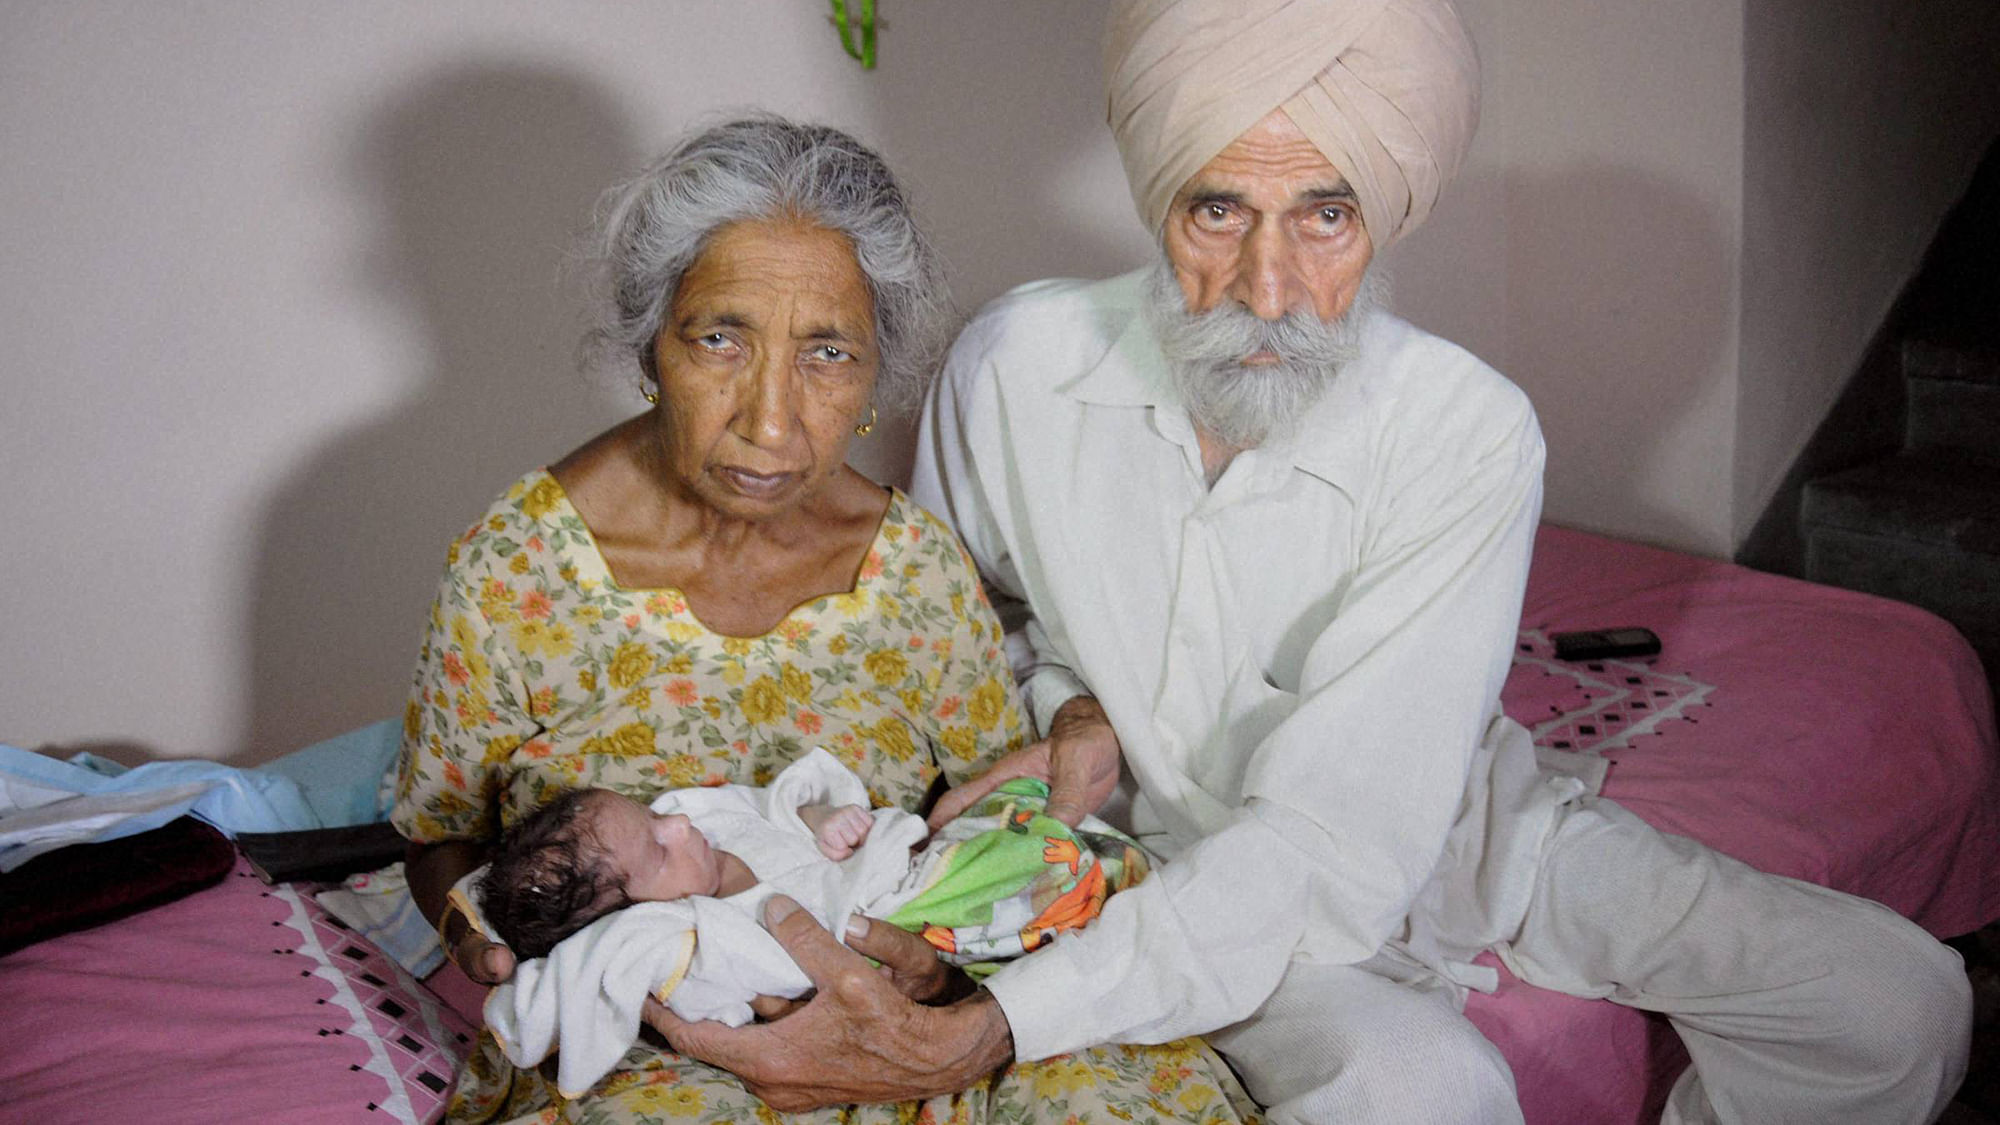 Parents Mohinder Singh Gill (R), 79, and Daljinder Kaur, 72, pose for a photograph as they hold their newborn baby boy Armaan at their home in Amritsar Wednesday. (Photo: PTI)